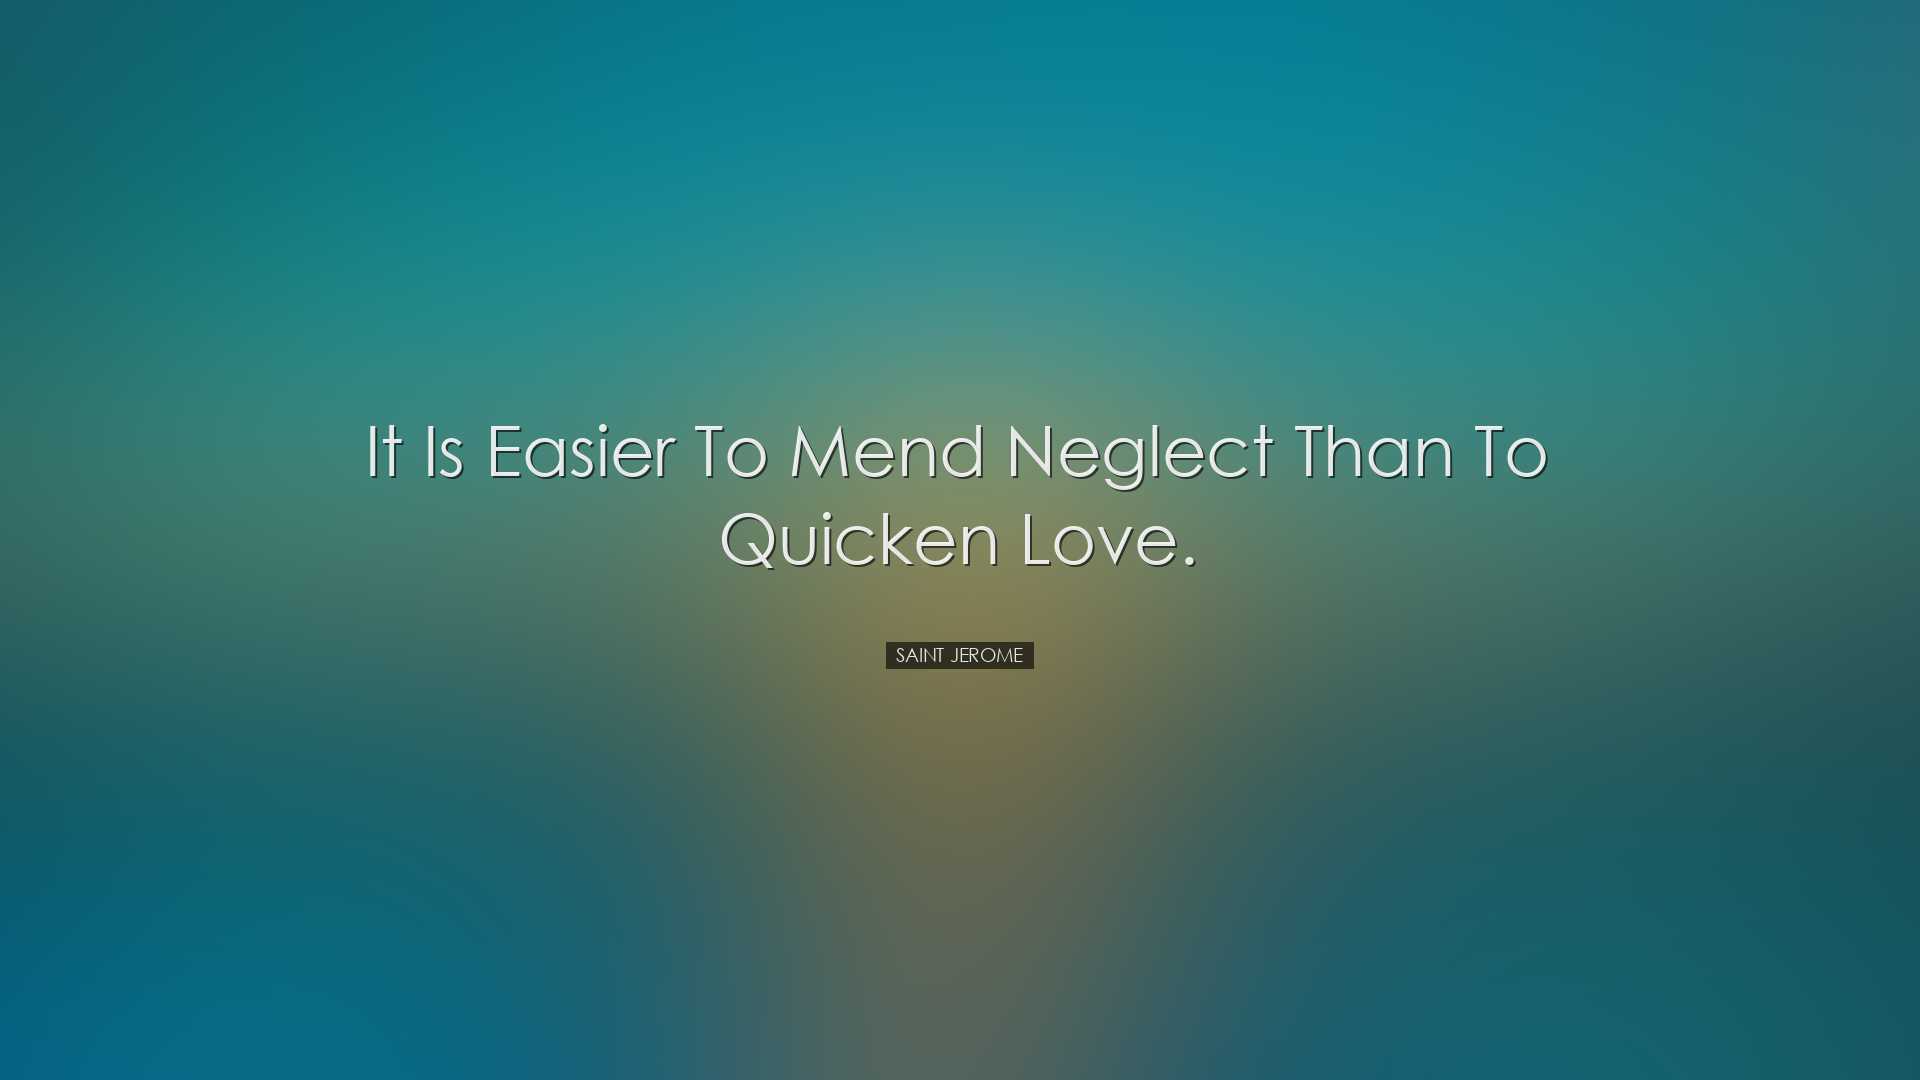 It is easier to mend neglect than to quicken love. - Saint Jerome